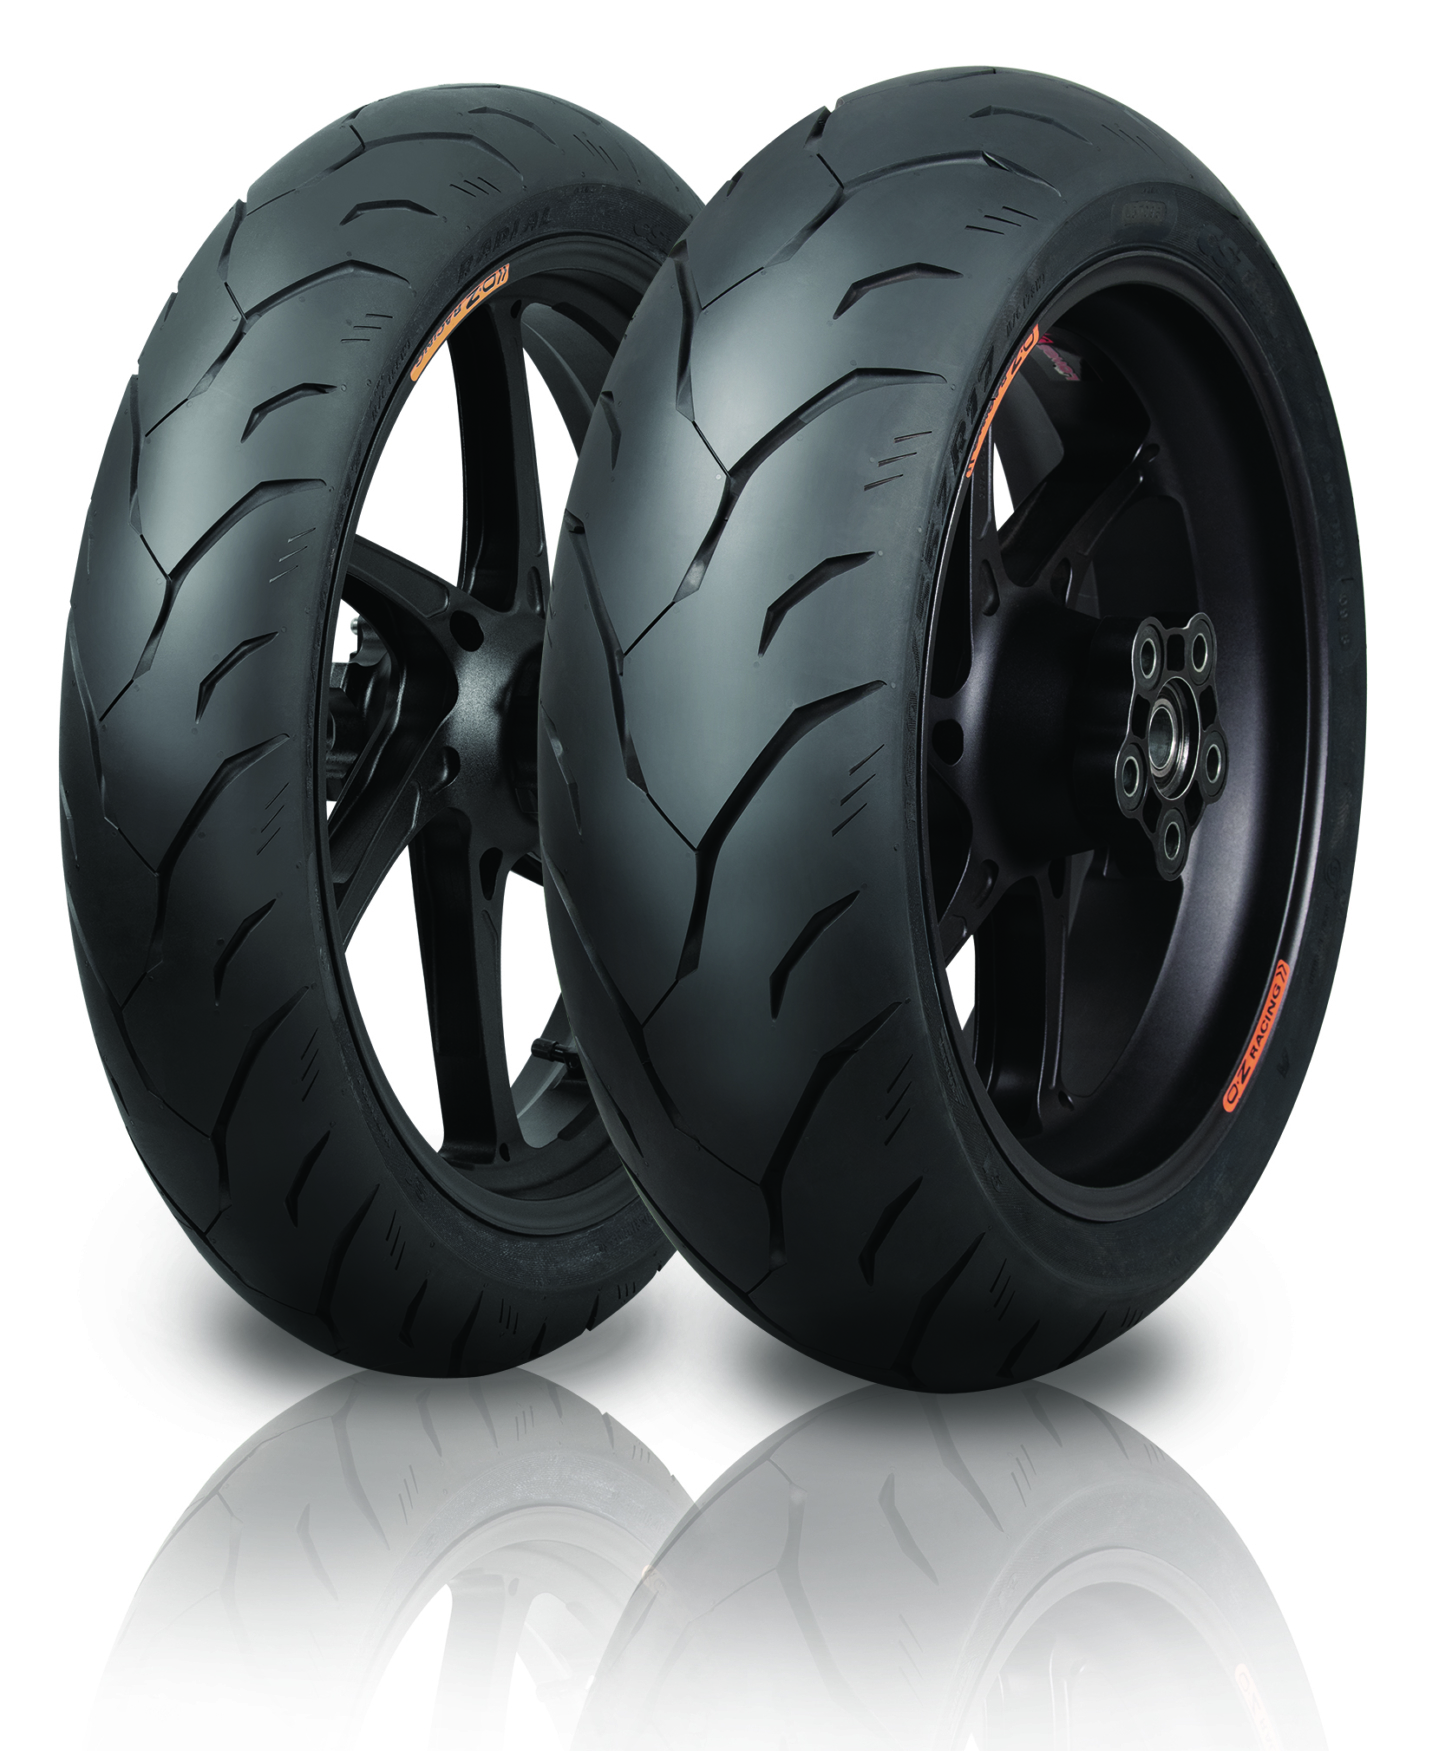 CST RideMigra sport-touring bike tyre now available